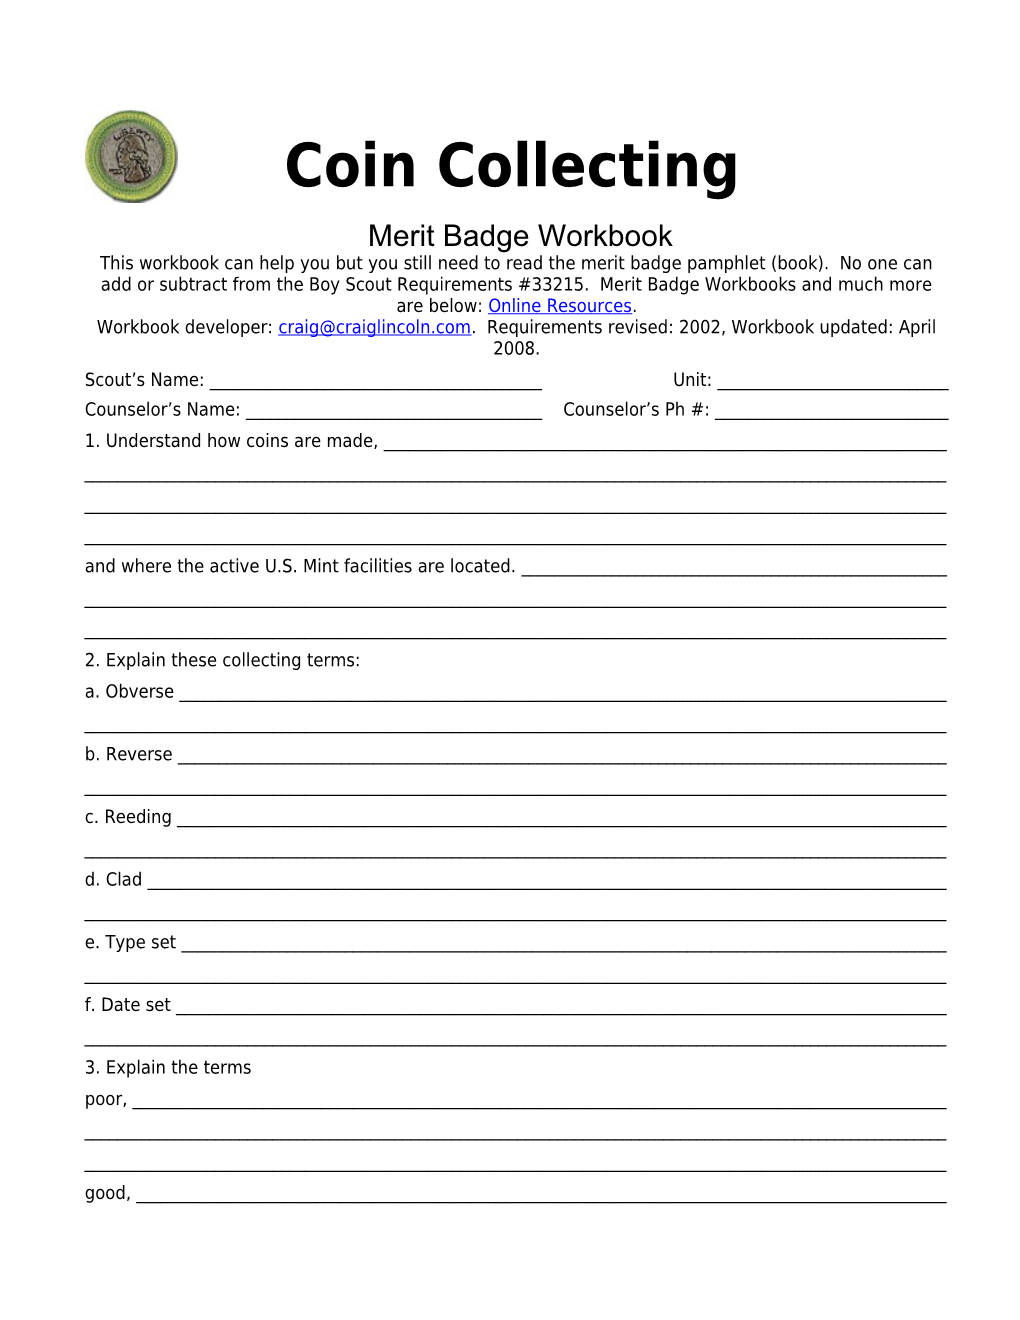 Coin Collecting P. 5 Merit Badge Workbook Scout's Name: ______